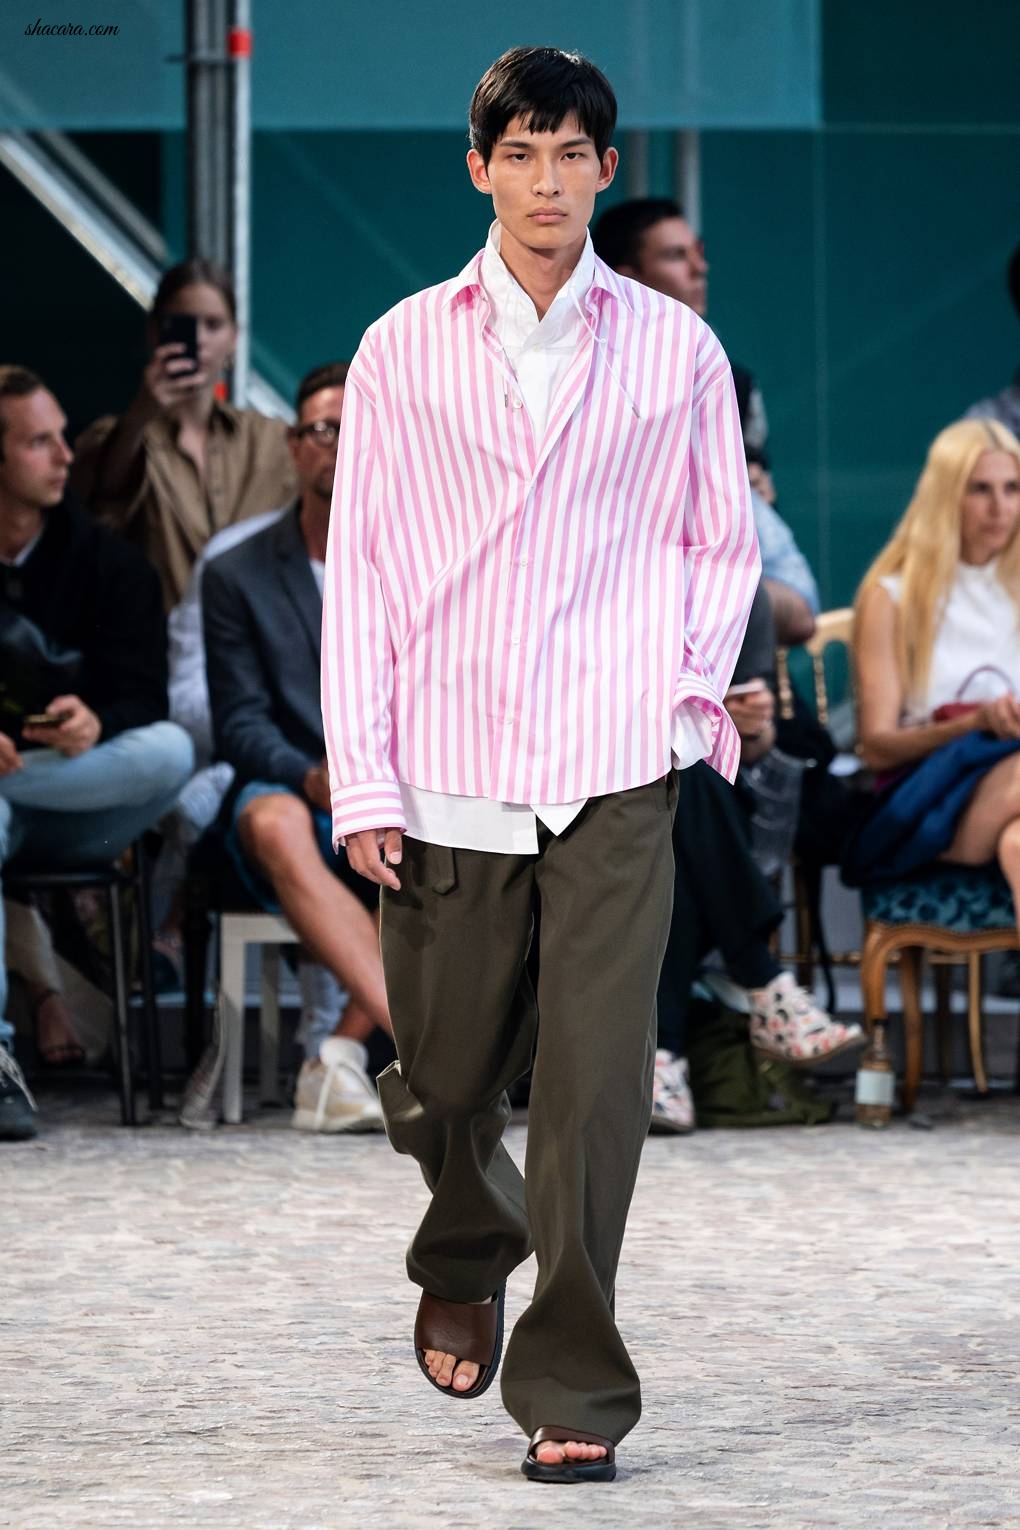 10 Looks We Loved From The Spring/Summer 2020 Menswear Shows